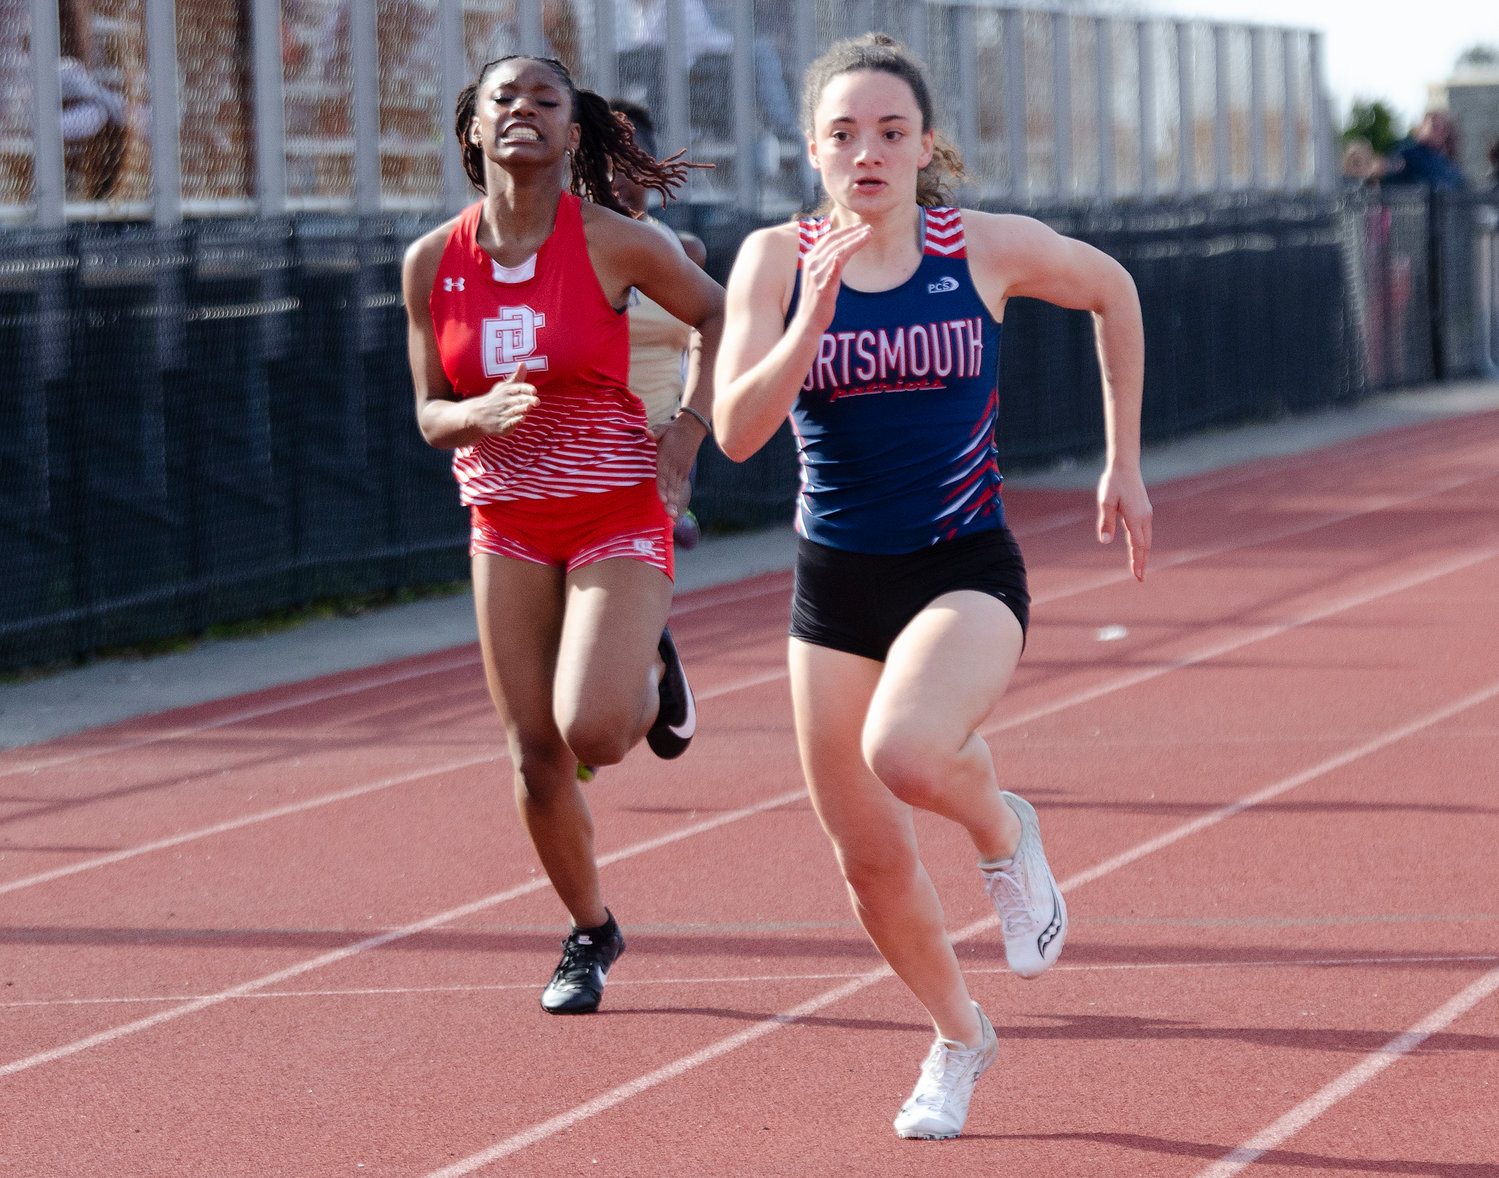 The Patriots’ Elly Skeels on her way to winning the girls’ 100-meter dash in a time of 13.4 seconds.